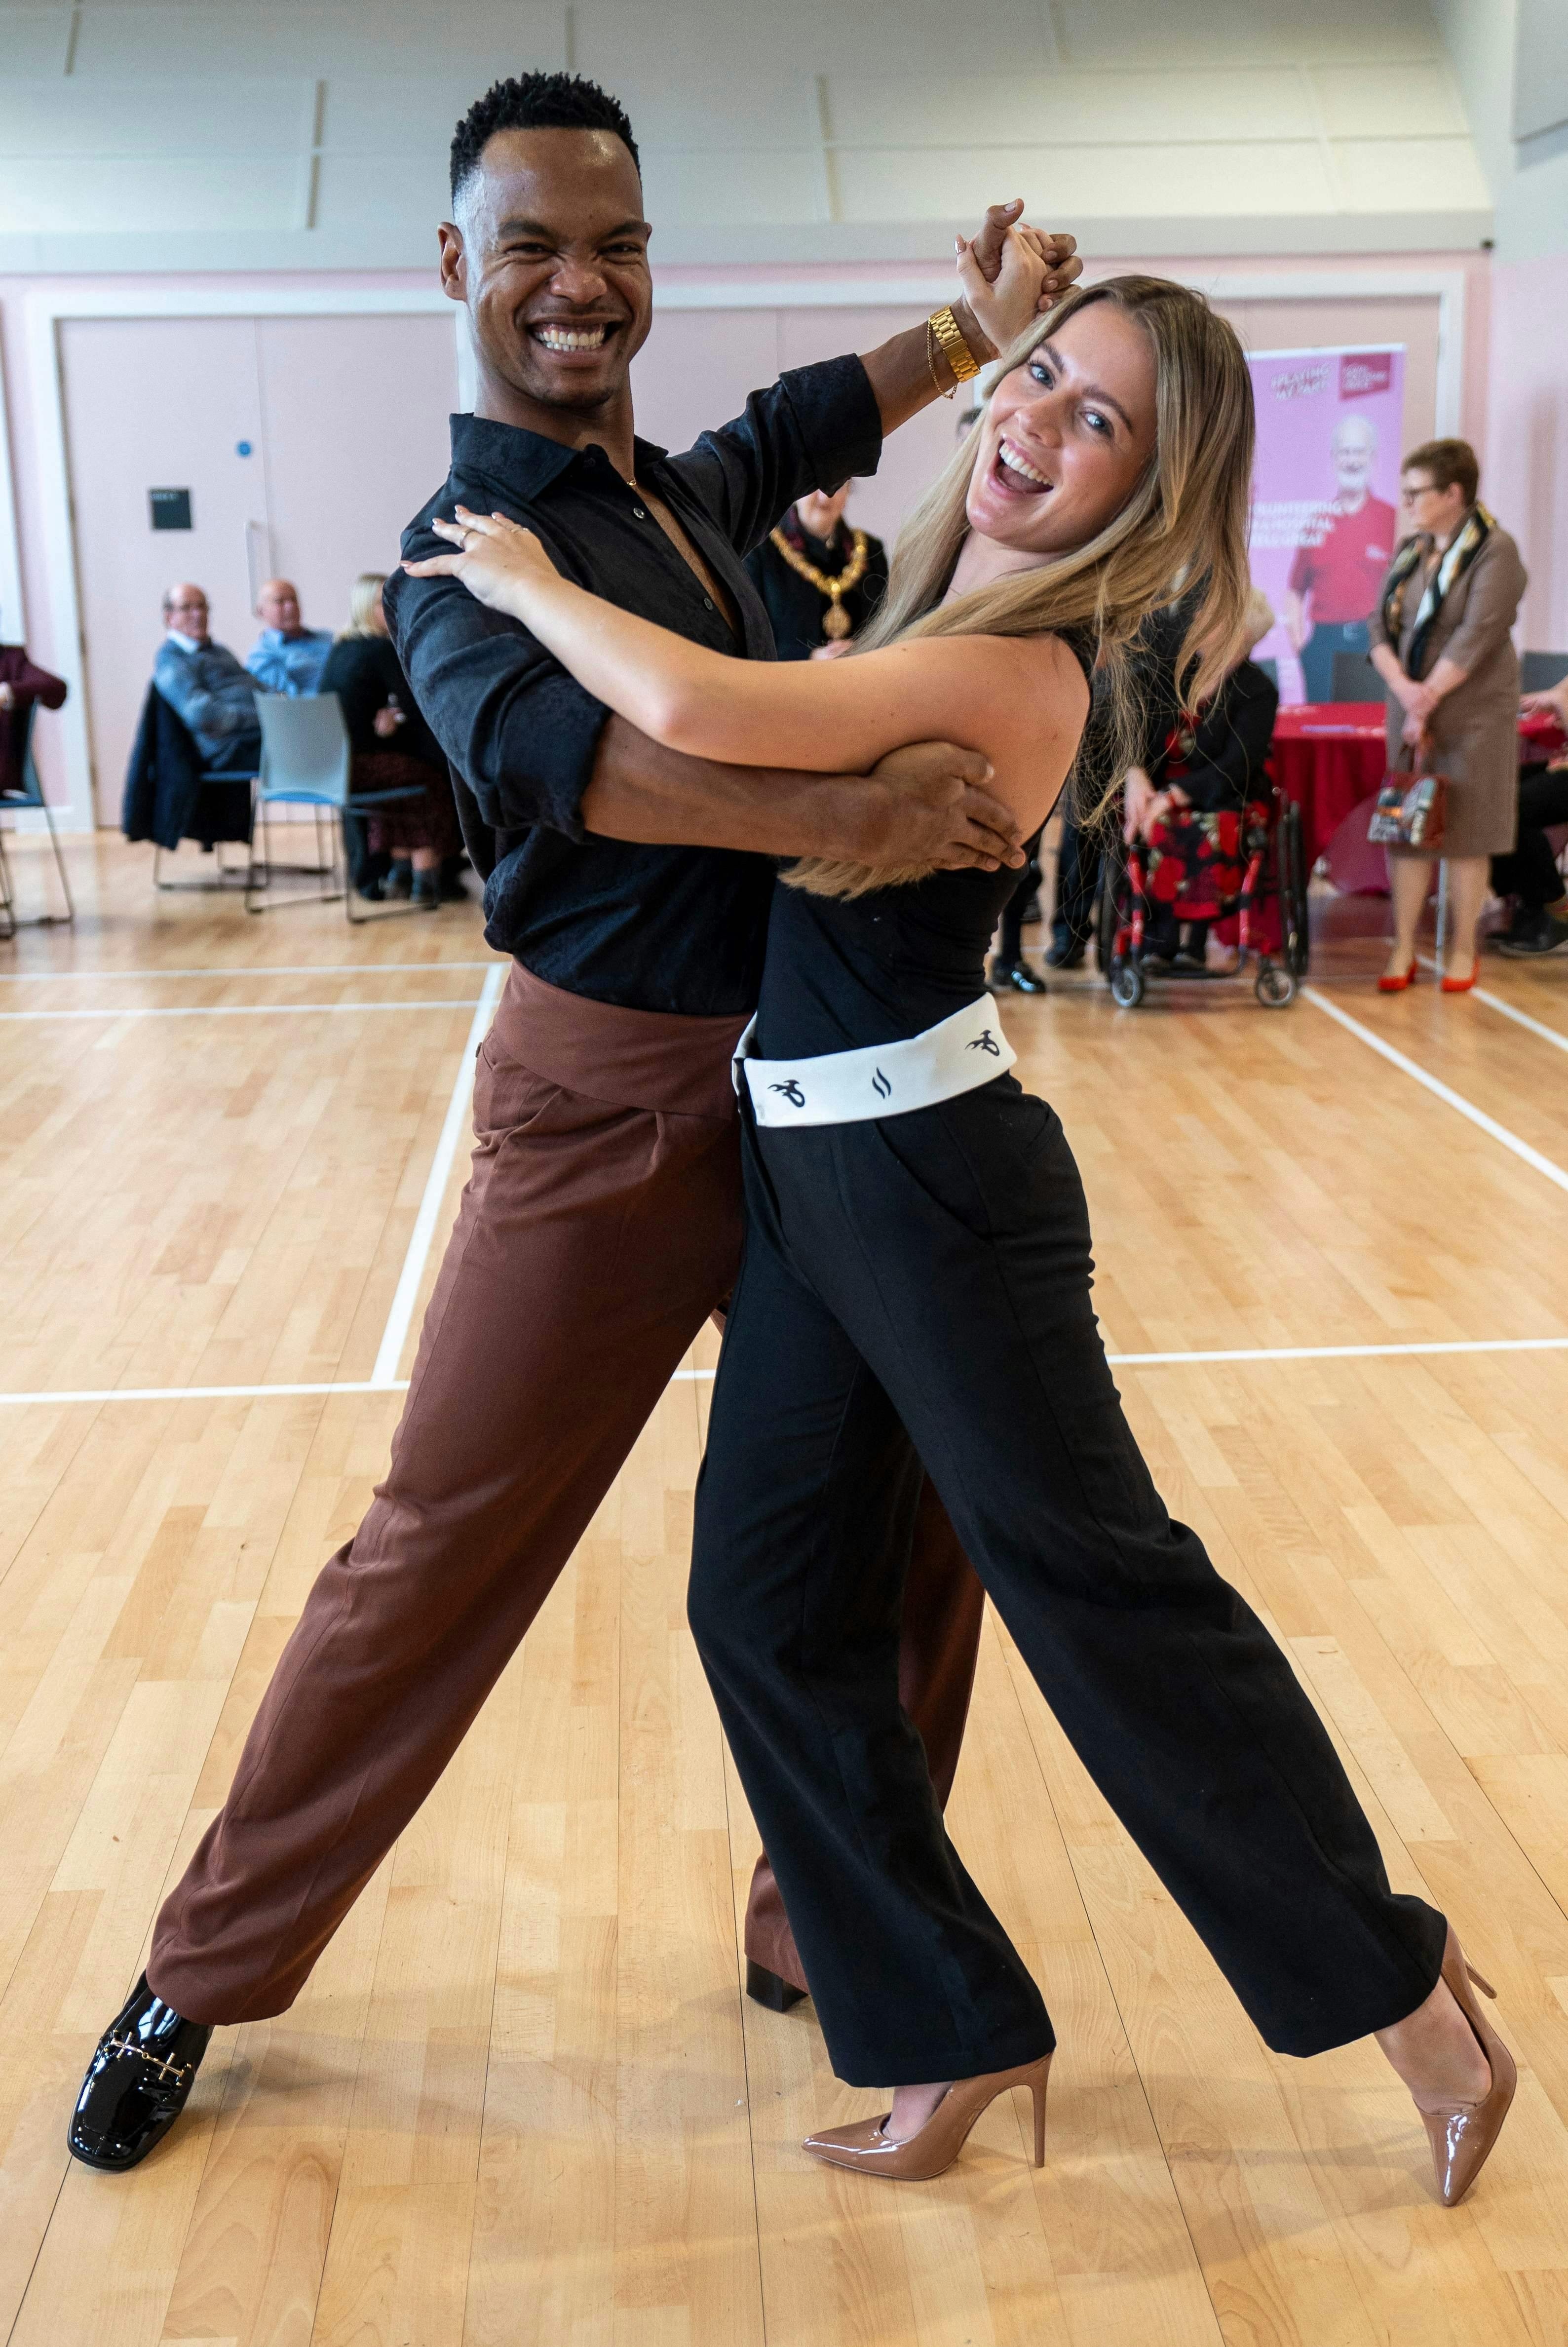 Dancer Johannes Radebe (L), a star on Strictly come Dancing and dancer Tasha Ghouri (R) who stars in Love Island, perform for Britain's Queen Camilla (not pictured) as she visits, in her role as President of the Royal Voluntary Service (RVS), the newly opened Meadows Community Centre in Cambridge, eastern England on February 2, 2024. (Photo by Arthur Edwards / POOL / AFP)